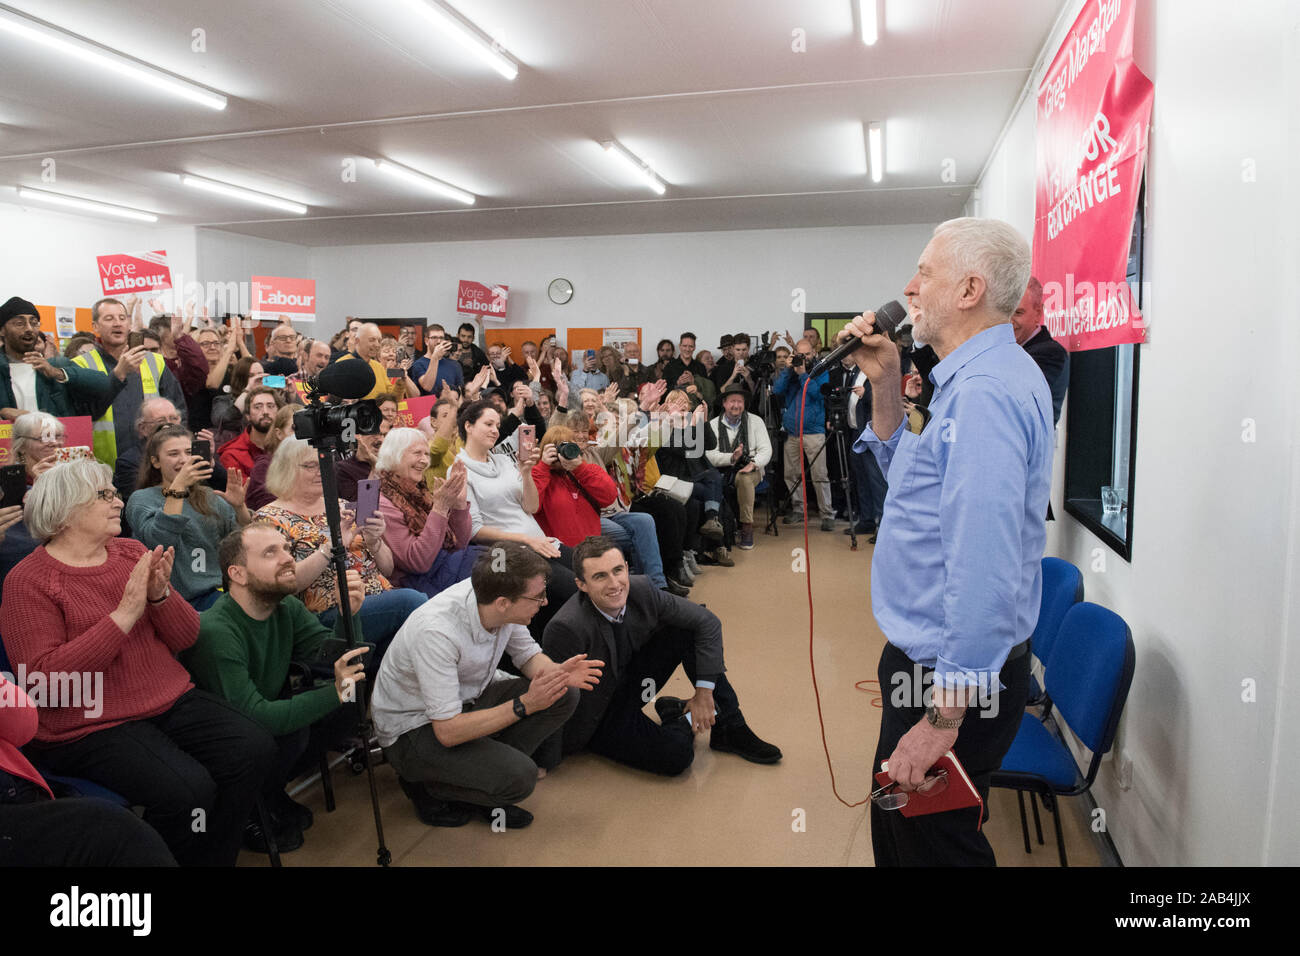 Beeston Rylands Community Centre, Broxtowe, Nottinghamshire, England, UK. 25th. November, 2019. Labour Leader Jeremy Corbyn at a Labour Party campaign rally in Broxtowe, Nottingham in support for Greg Marshall who is the Labour Party Parliamentary Candidate for Broxtowe at the of start 2019 election campaign. This Parliamentary seat which was won by Anna Soubry for the Conservative Party by a close margin of 863 votes and now standing as an for the Independent Group.Credit: AlanBeastall/Alamy Live News Stock Photo